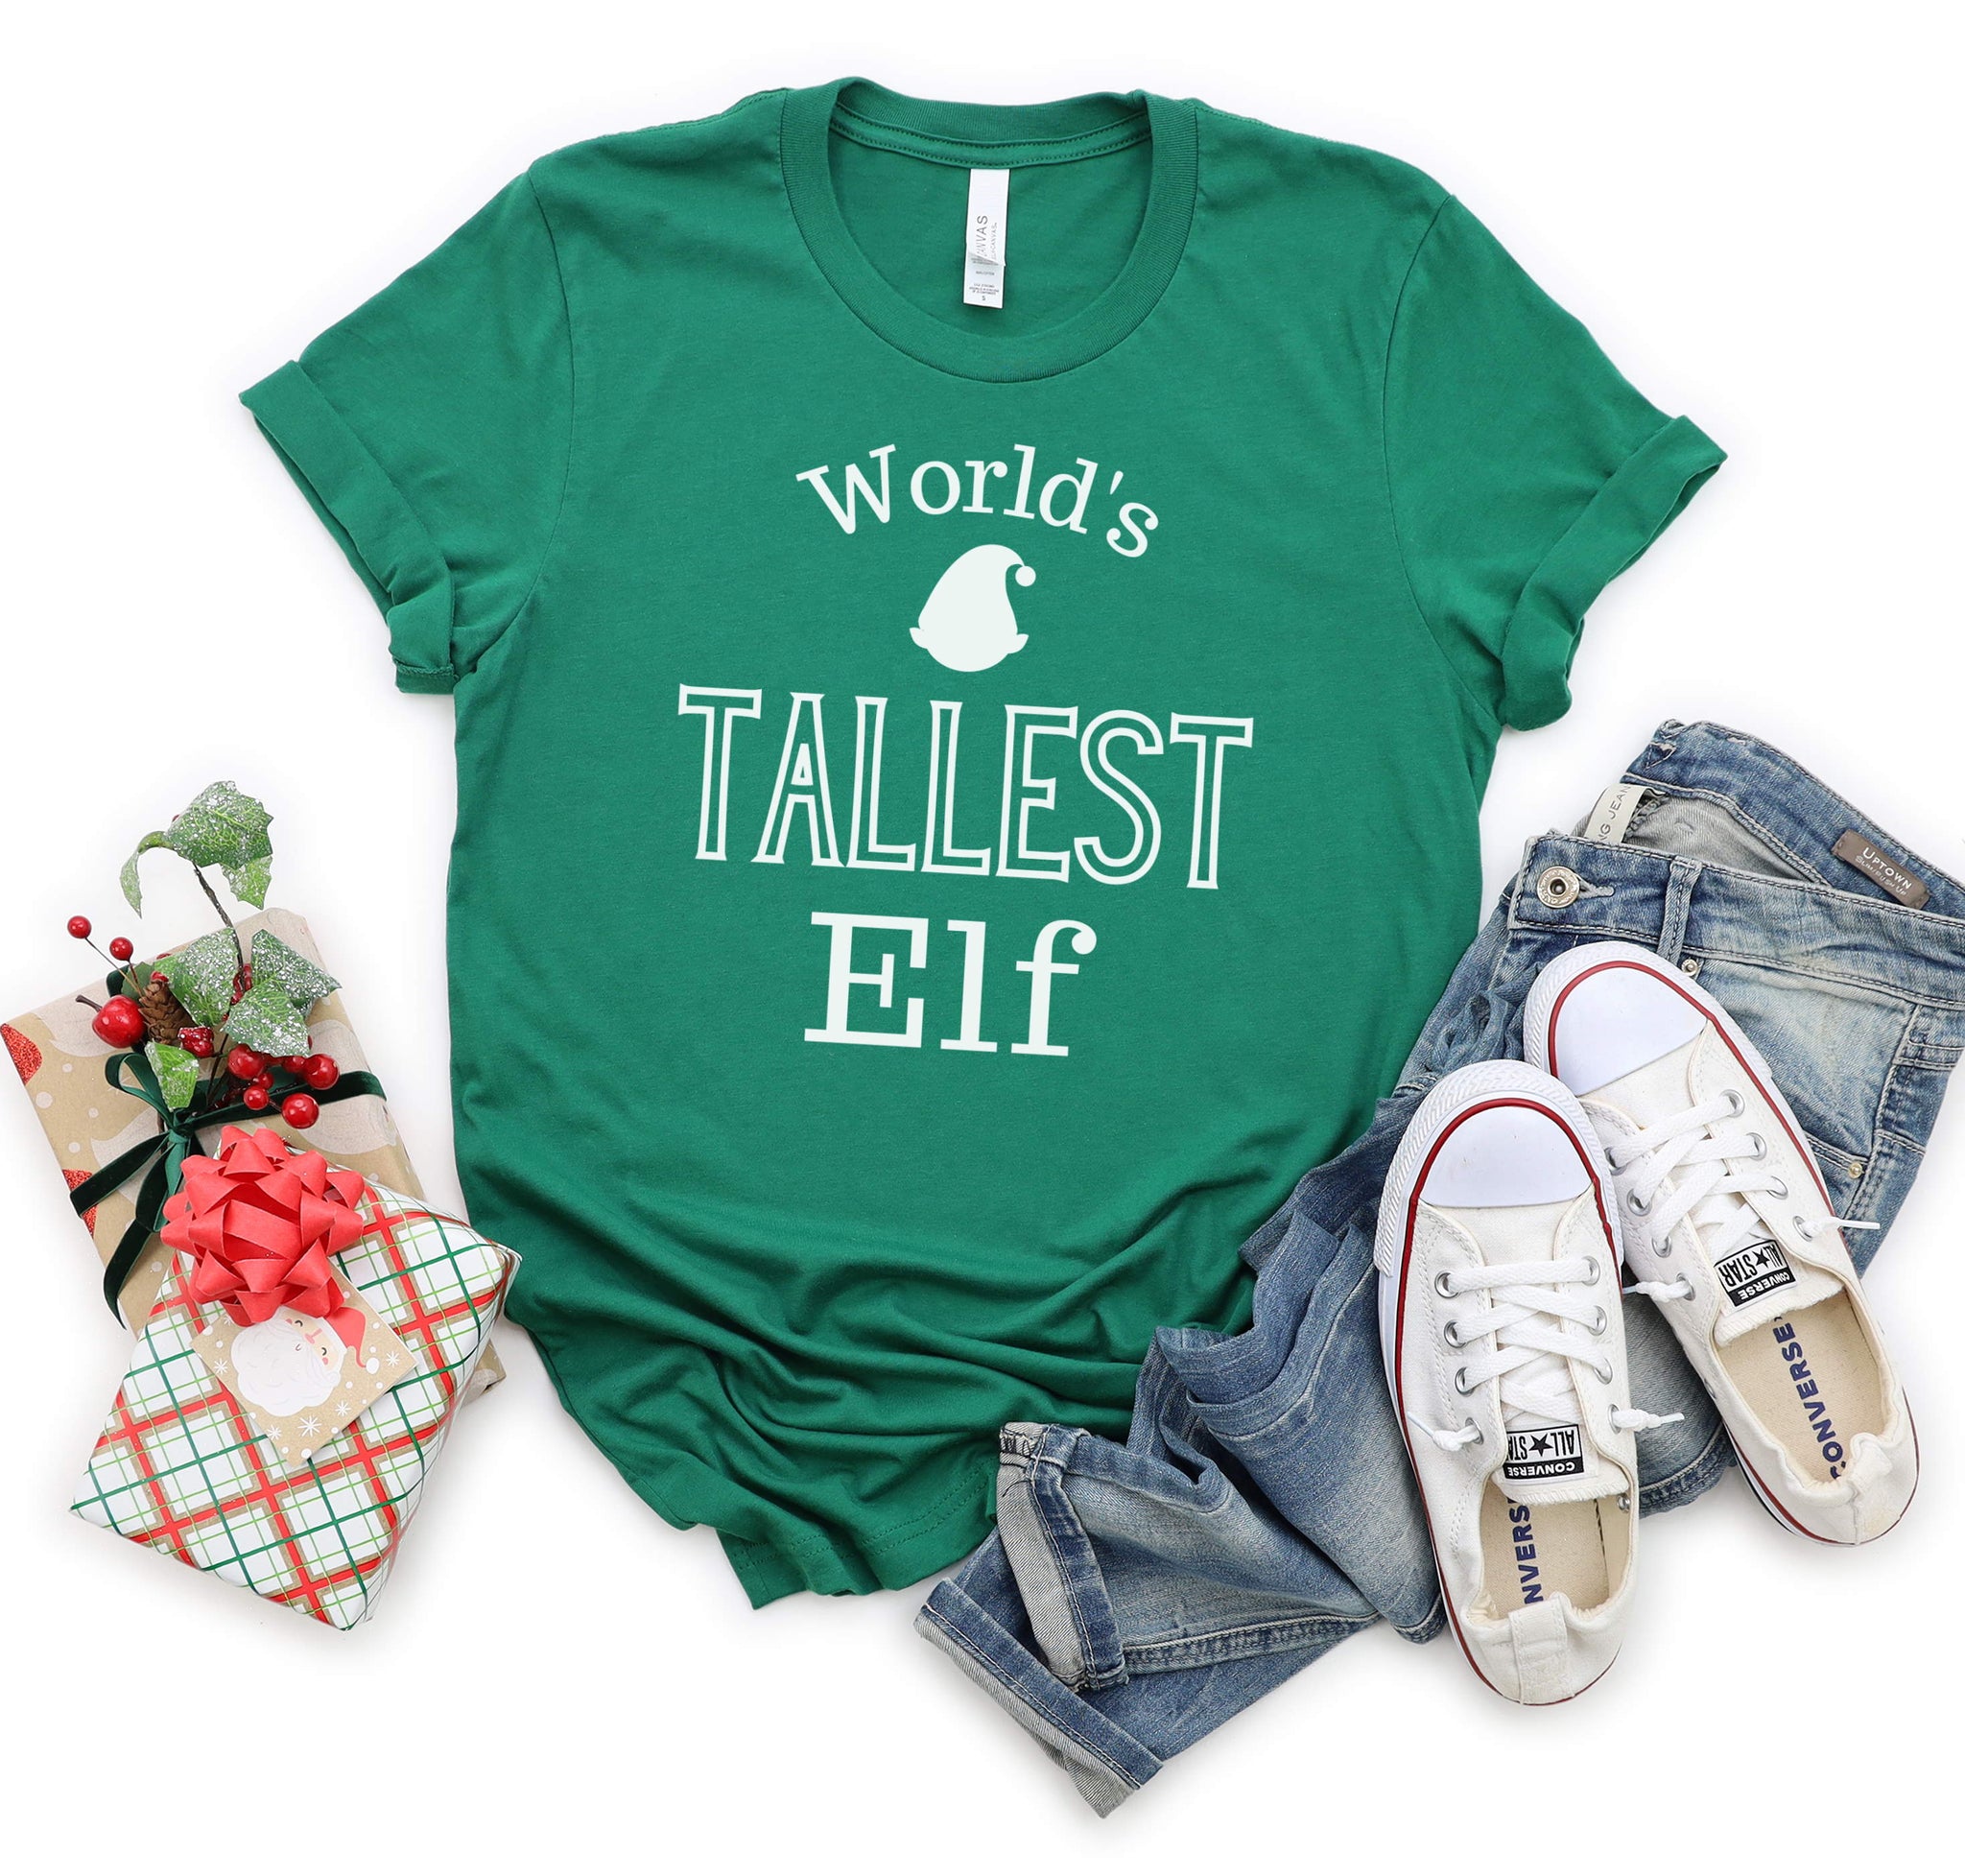 Funny Christmas t-shirt for tall people that says "World's Tallest Elf".